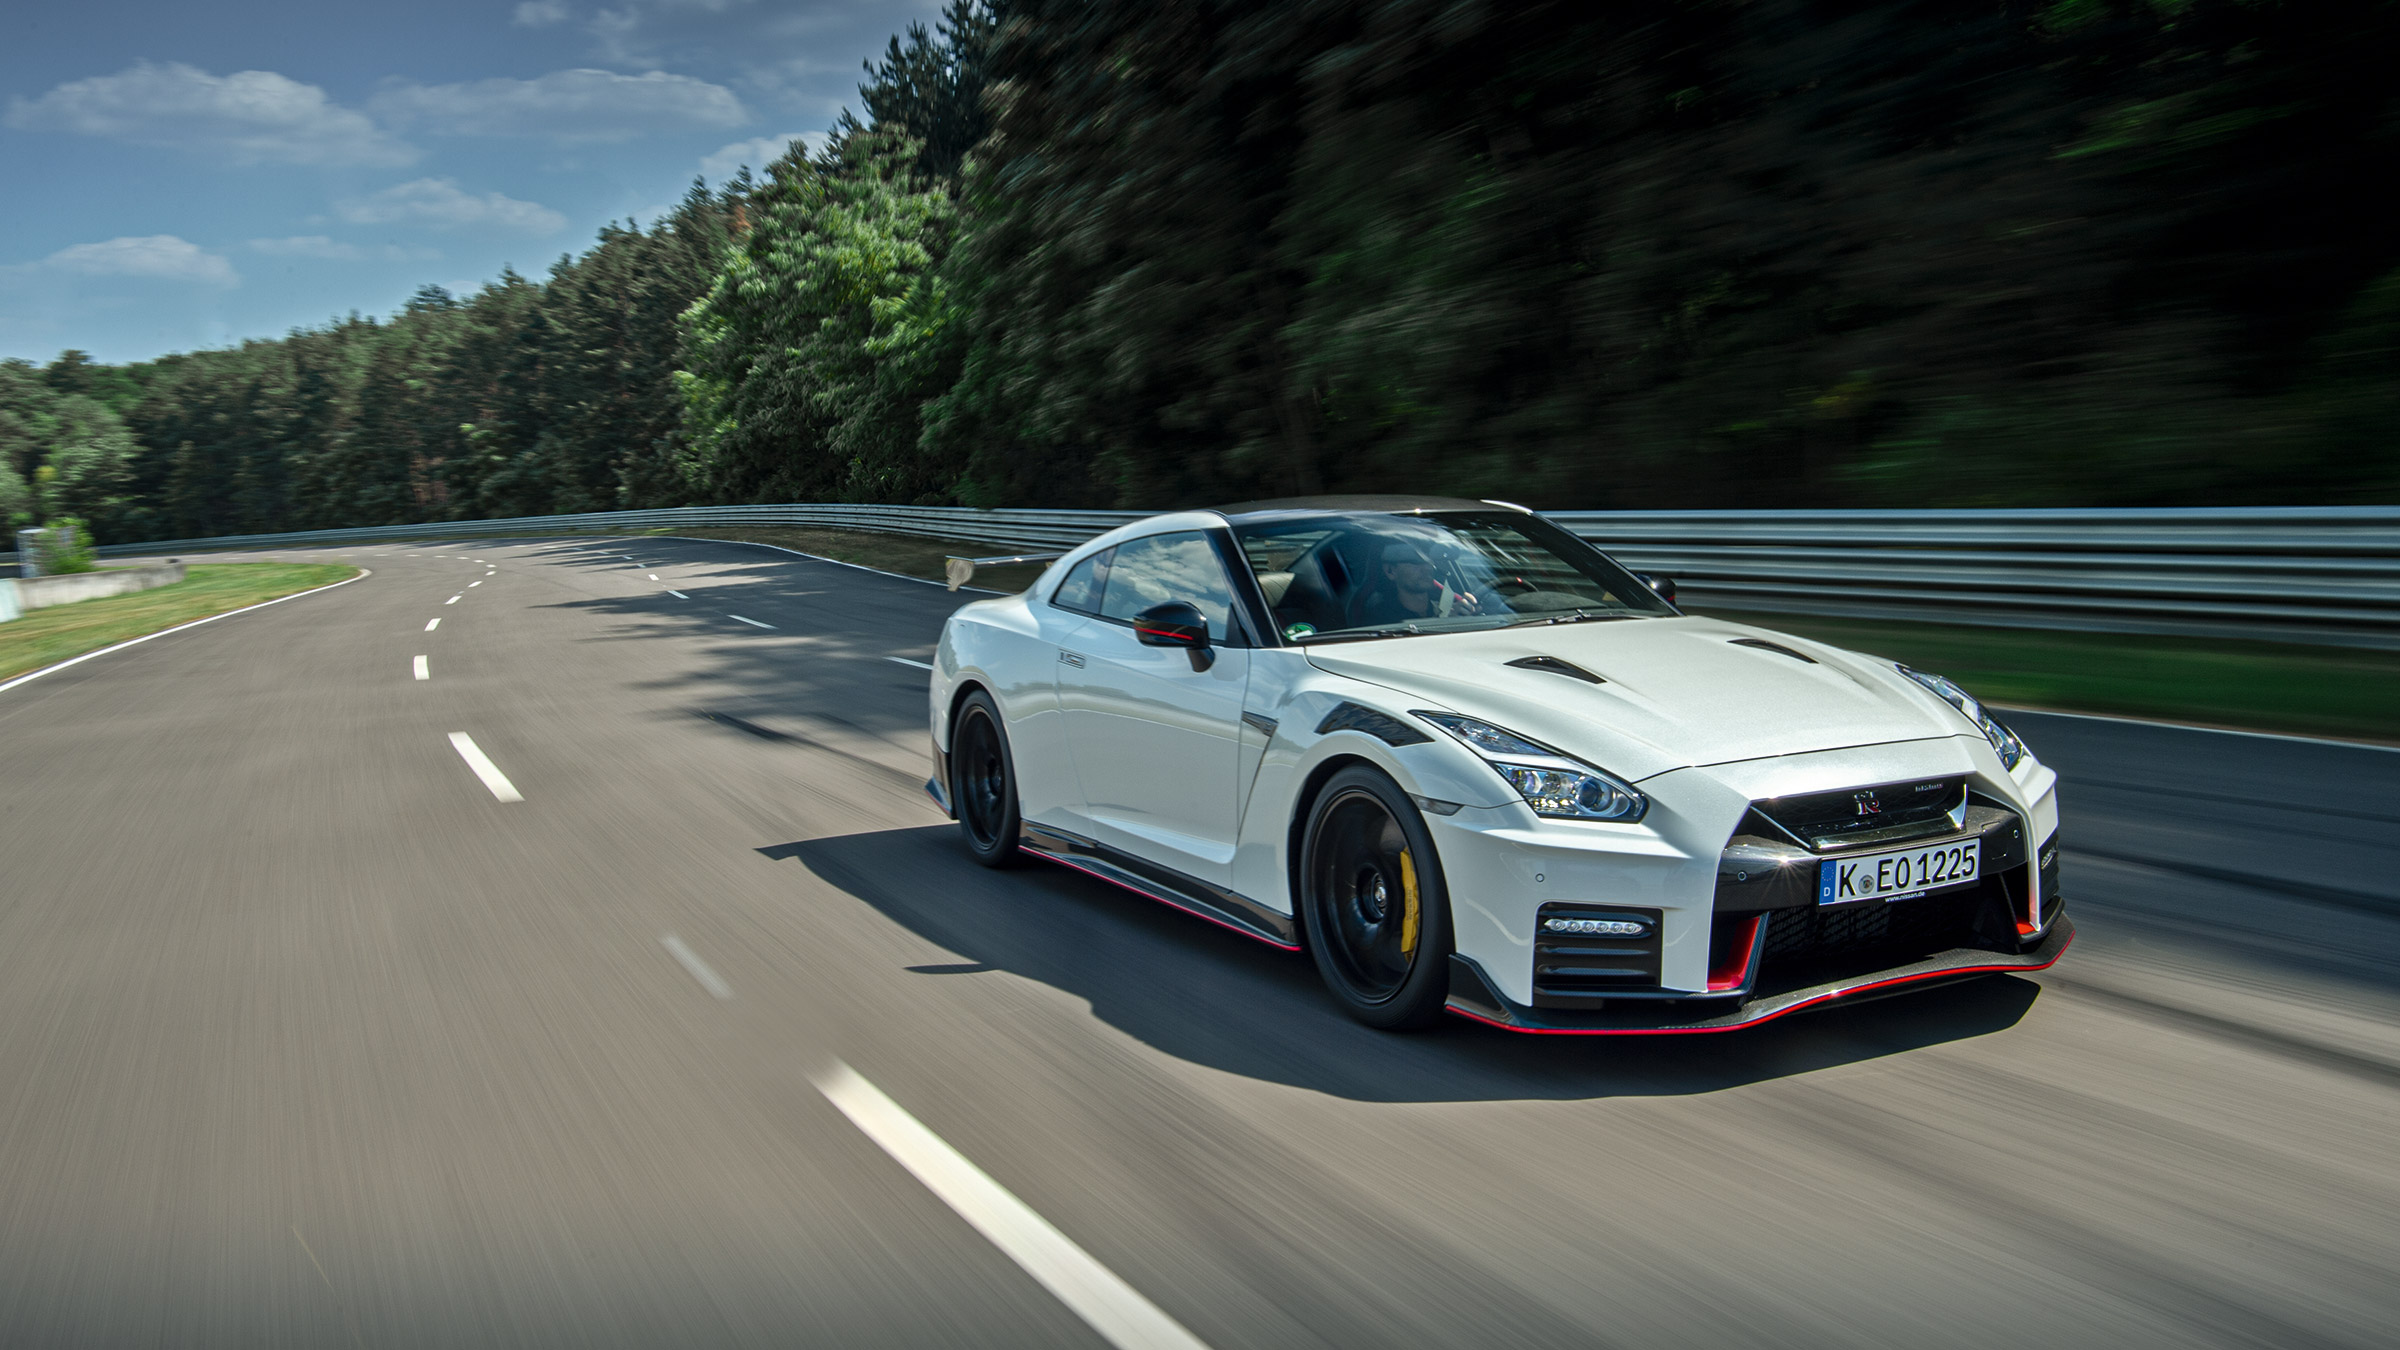 My Nissan Gt R Nismo Review Evo